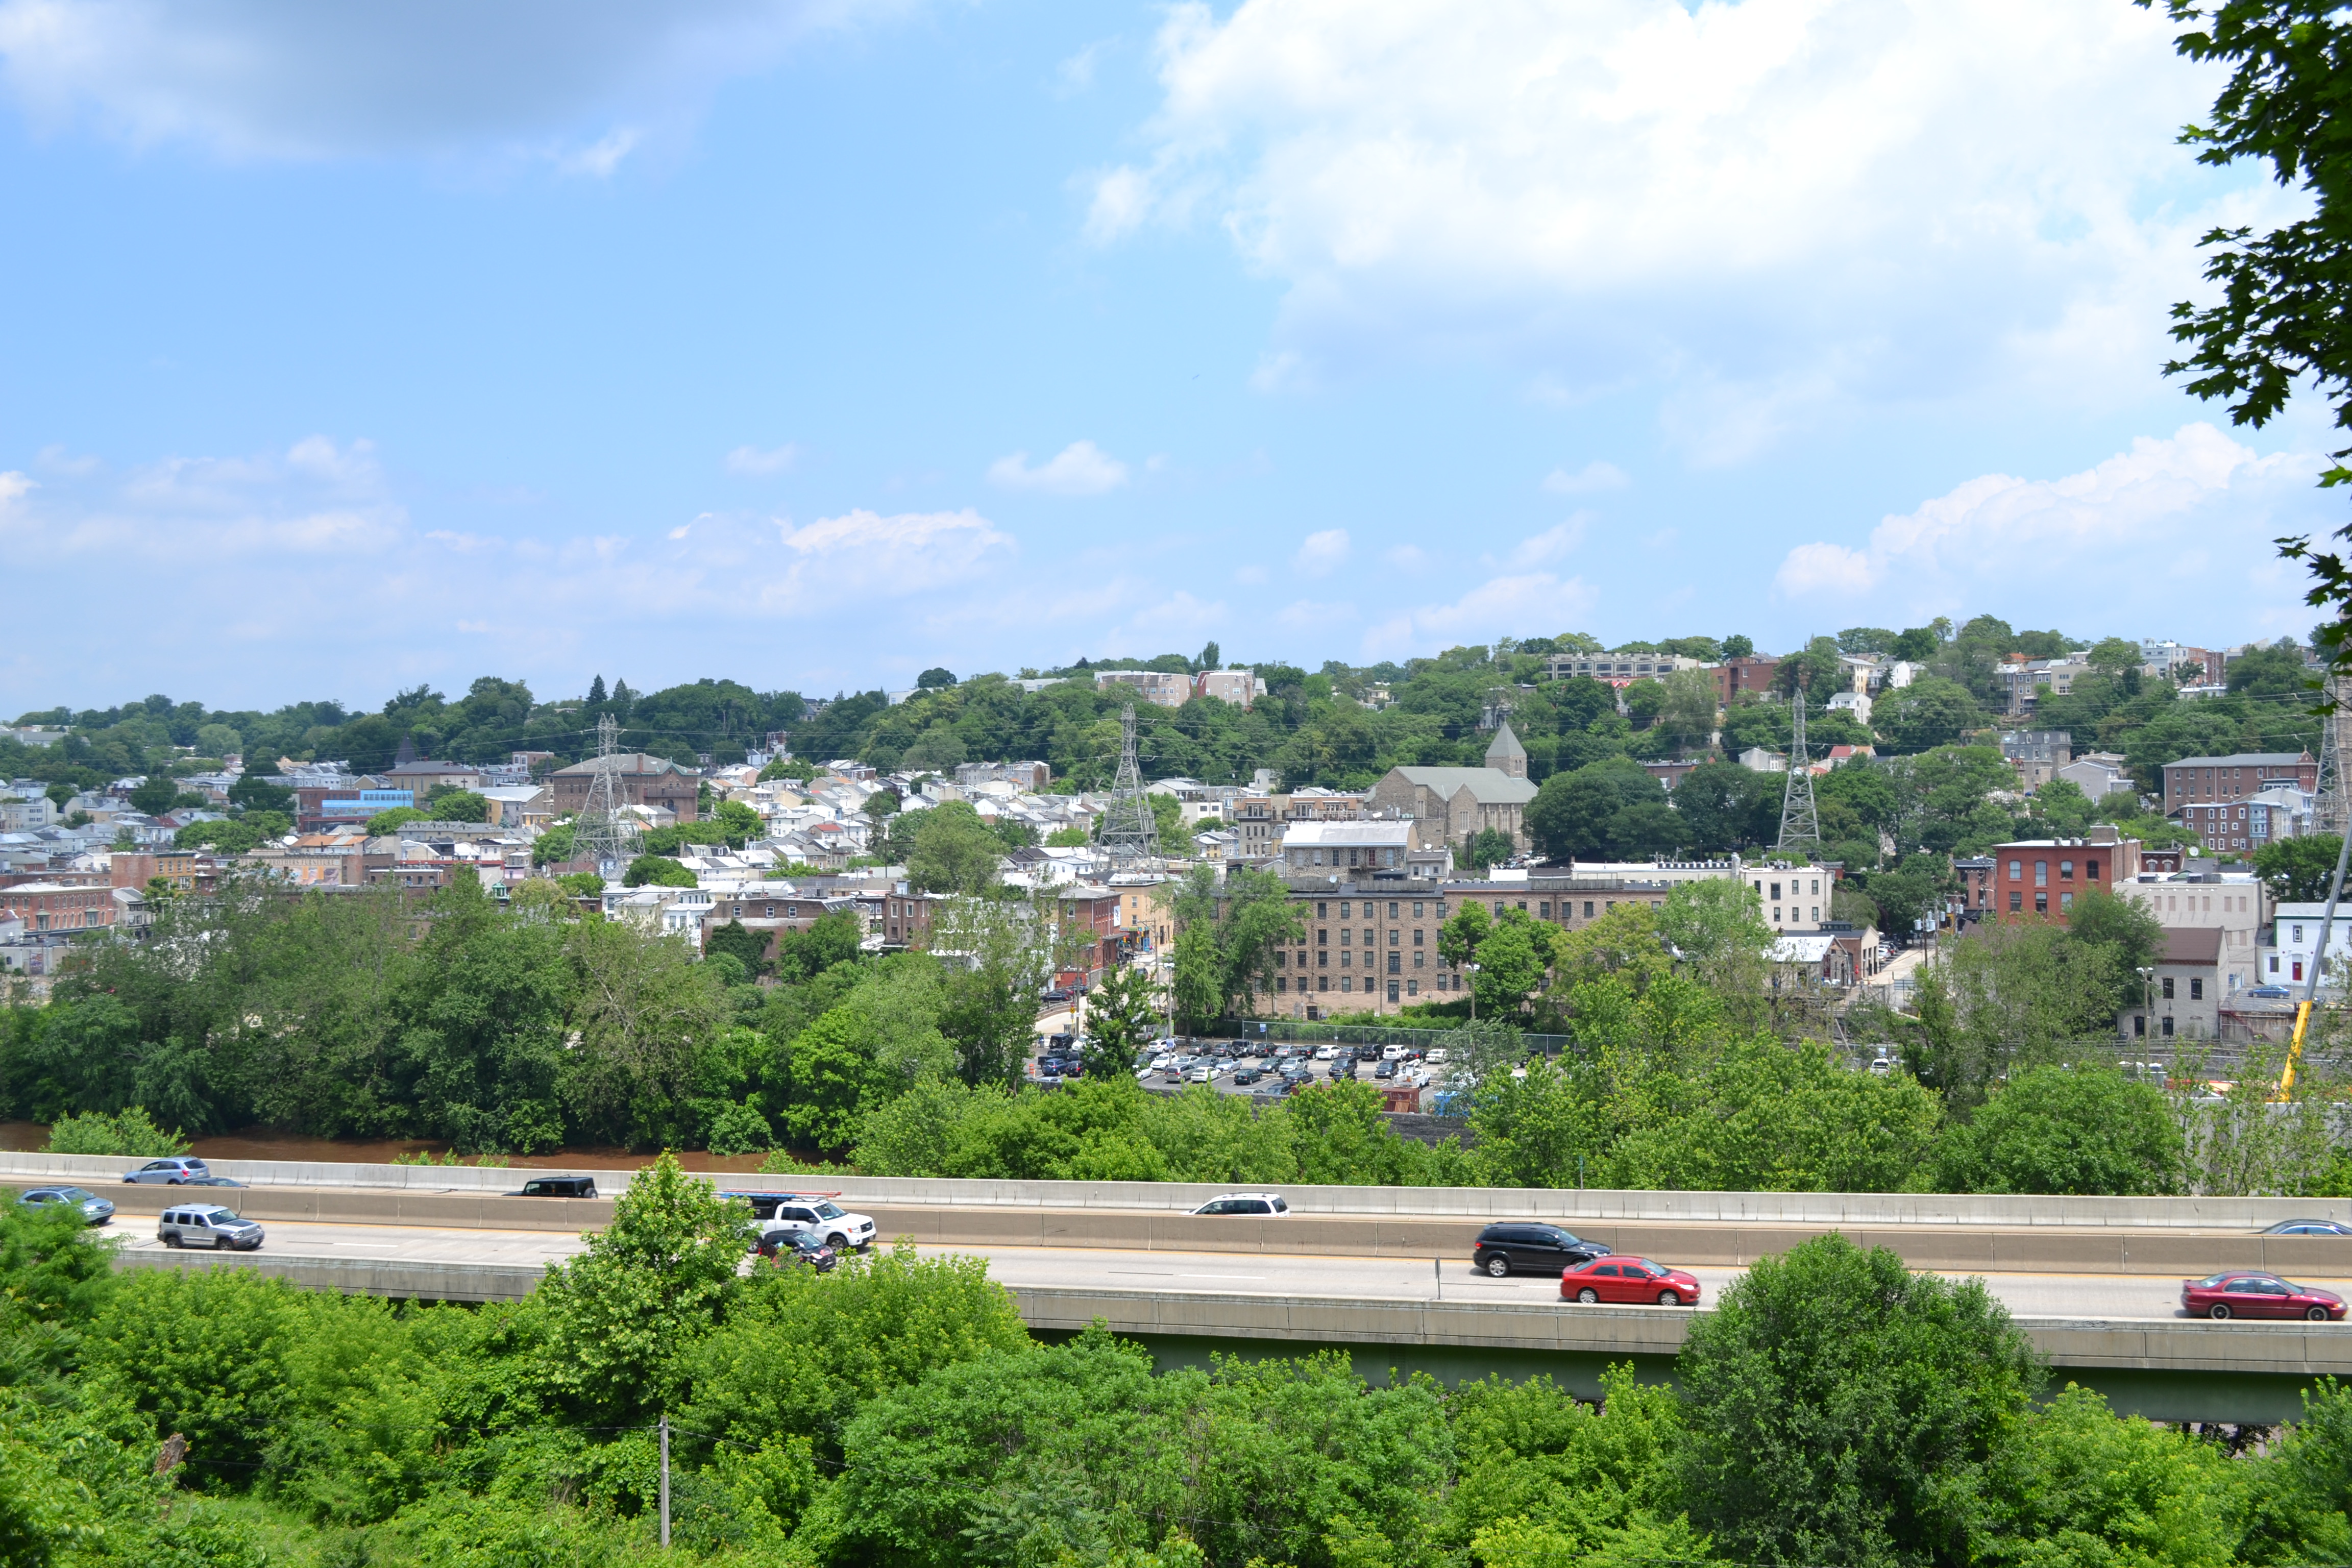 Francis said the expressway disconnects Bala Cynwyd from Manayunk more than the river does